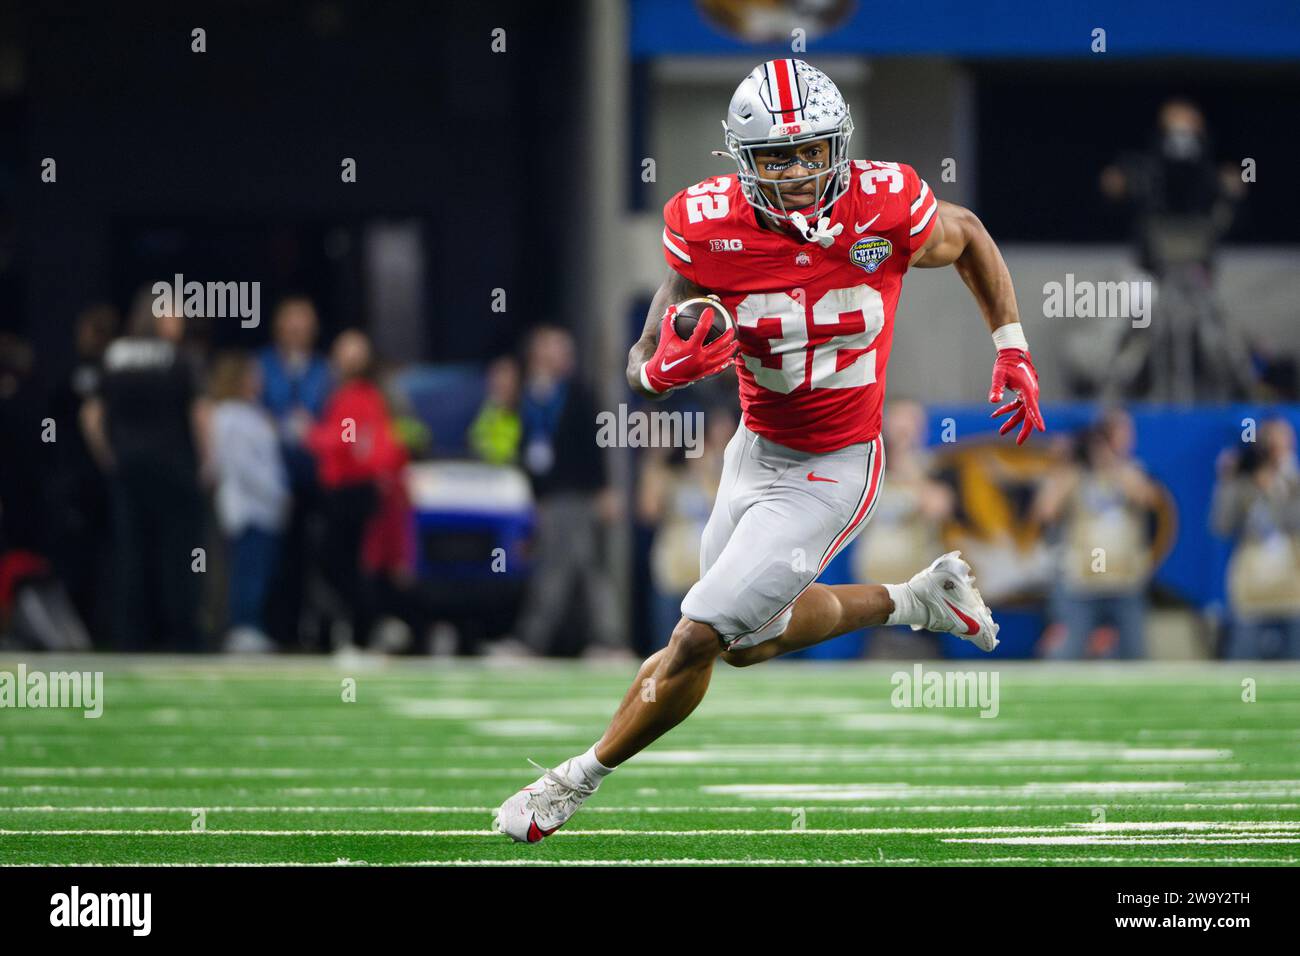 Arlington, Texas, USA. 29th Dec, 2023. Ohio State Buckeyes running back TreVeyon Henderson (32) during the 1st half of the NCAA Football game between the Missouri Tigers and Ohio State Buckeyes at AT&T Stadium in Arlington, Texas. Matthew Lynch/CSM/Alamy Live News Stock Photo